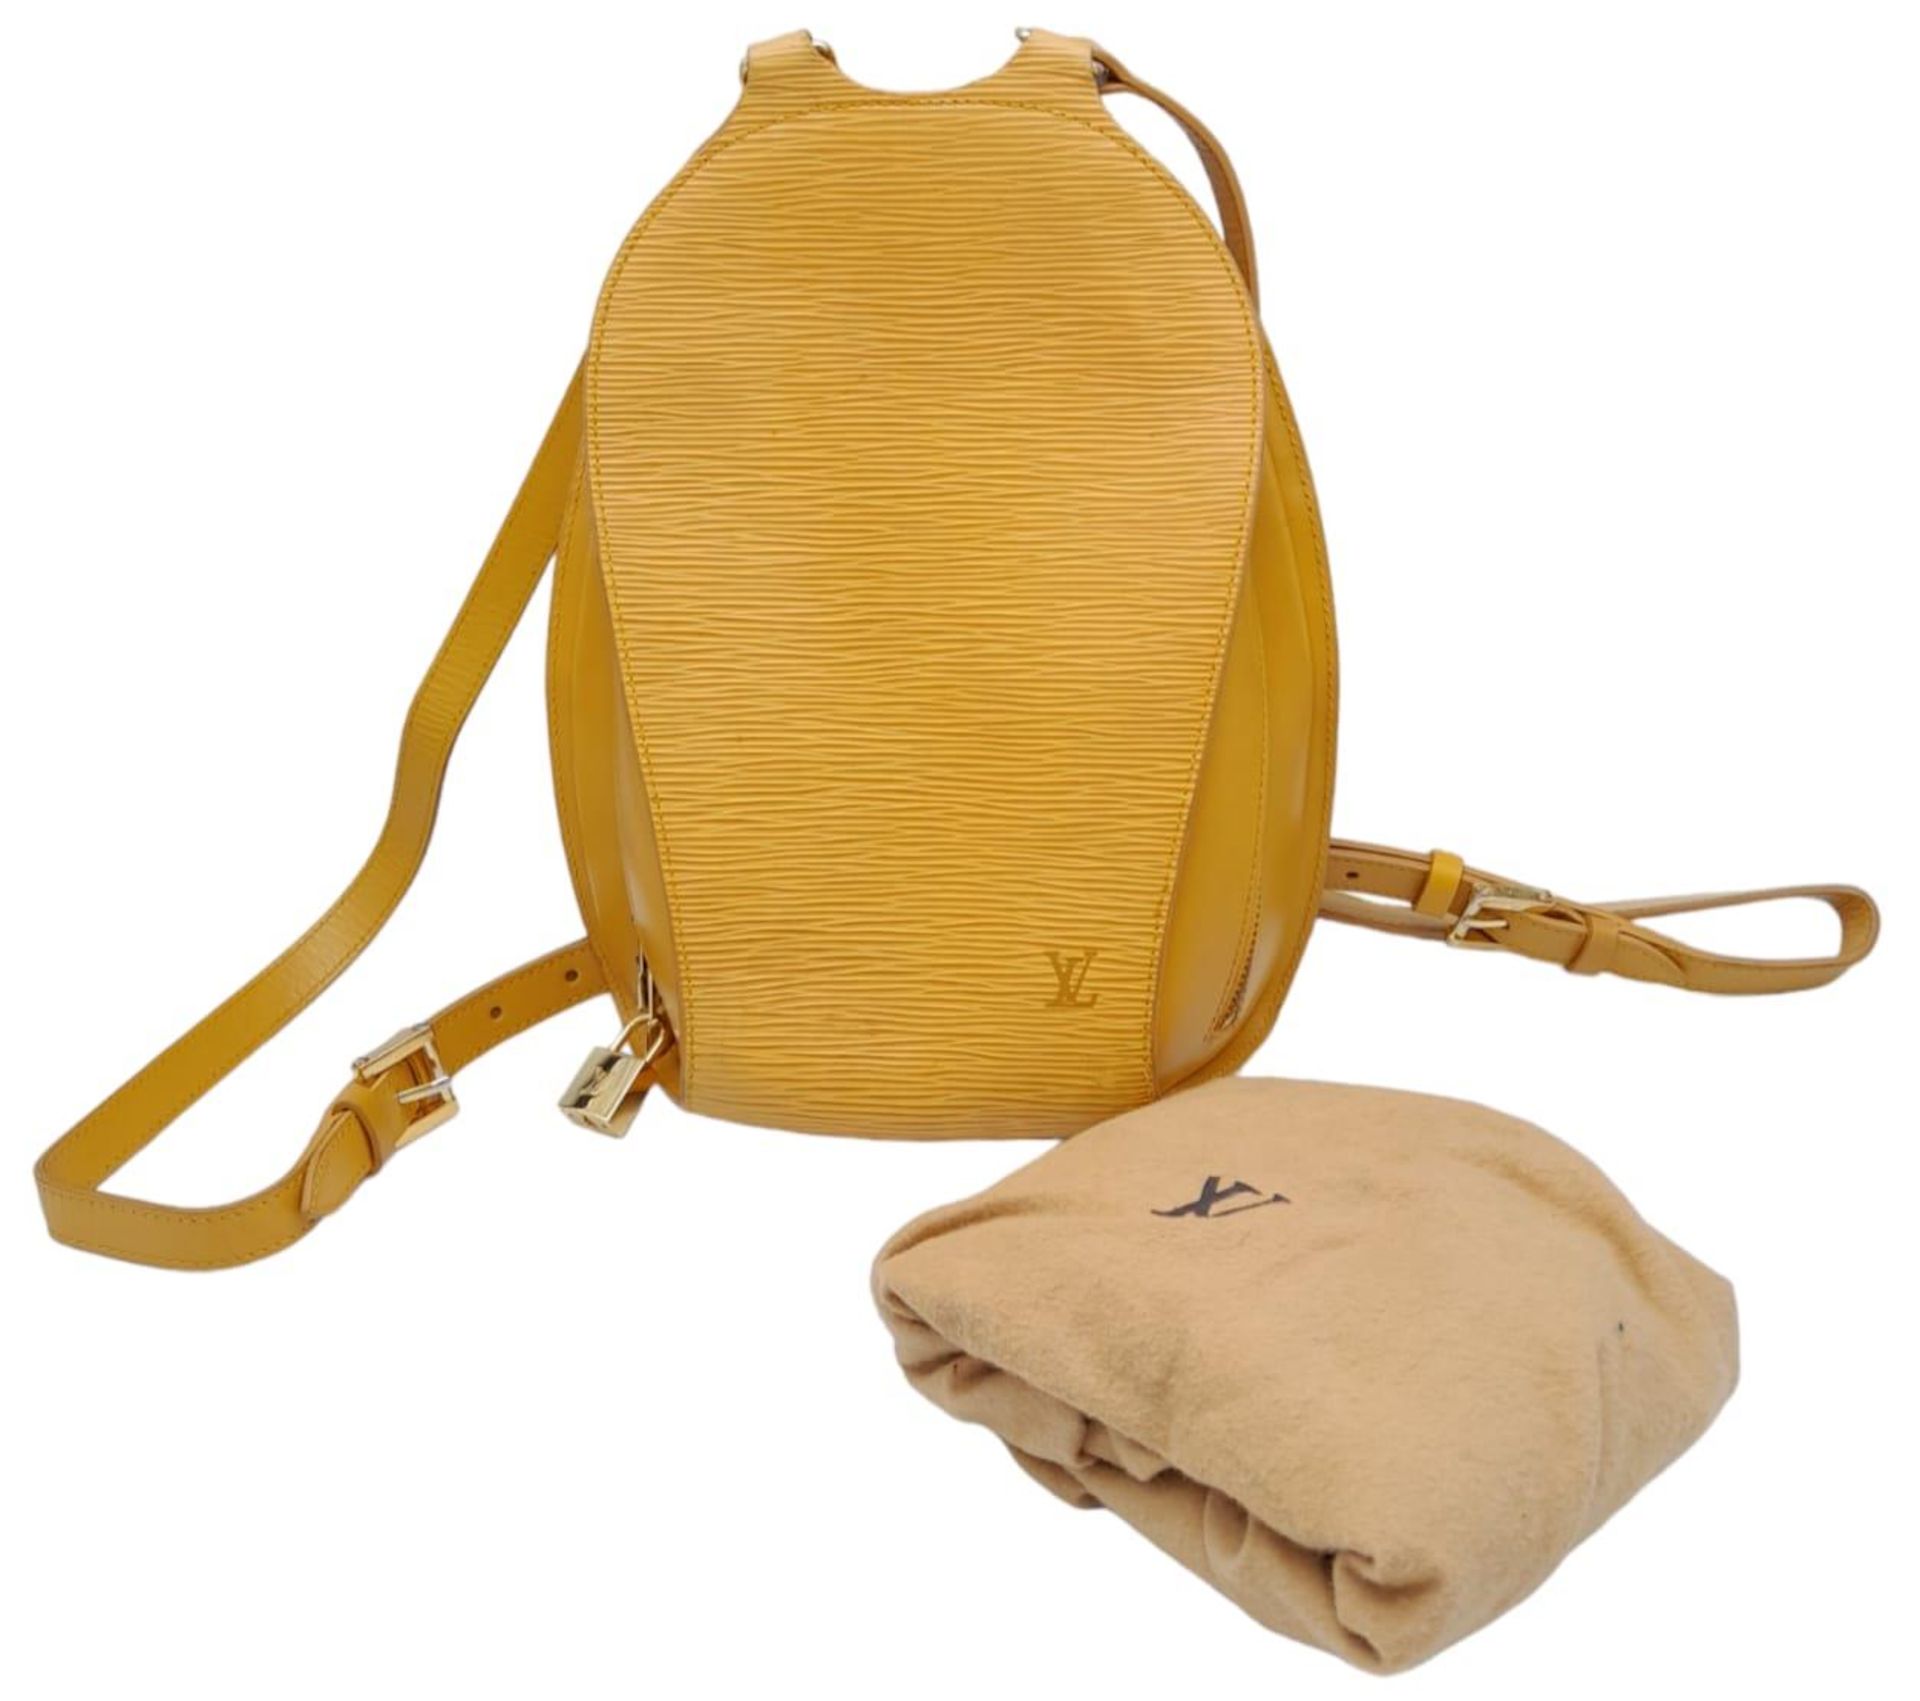 A Louis Vuitton Yellow 'Mabillon' Backpack. Epi leather exterior with gold-toned hardware, the